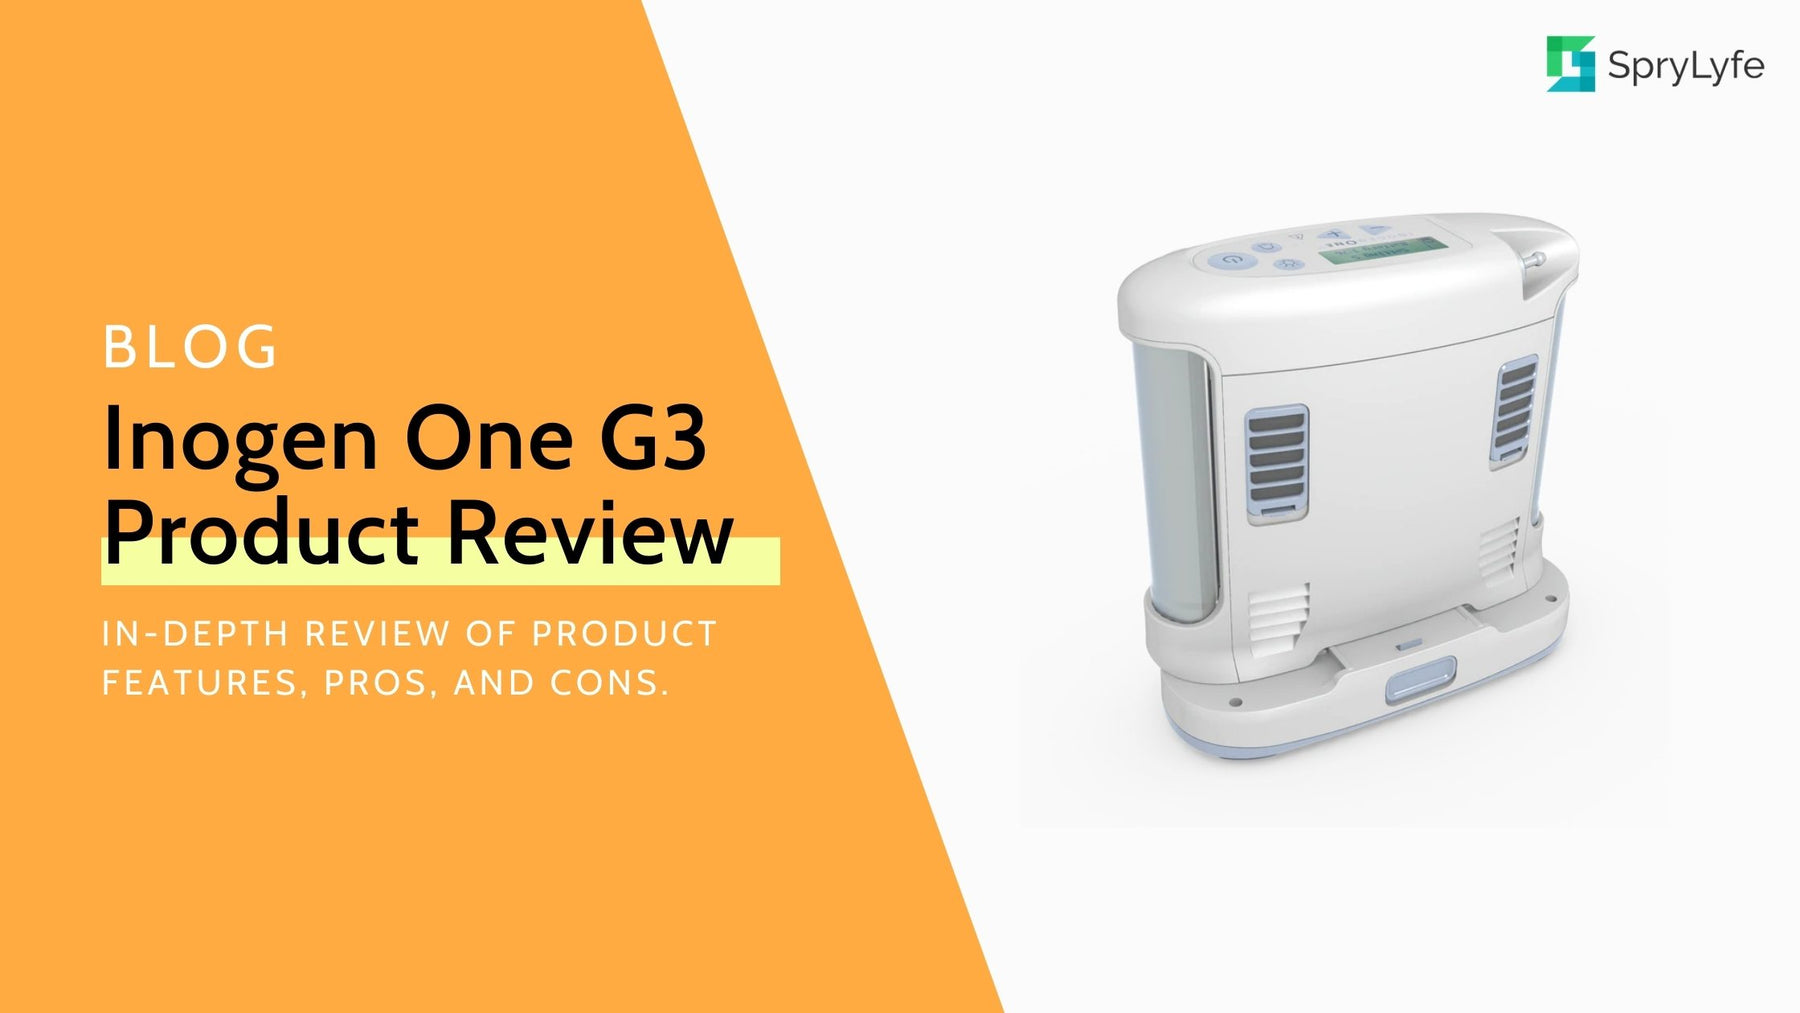 Inogen One G3 Portable Oxygen Concentrator Review